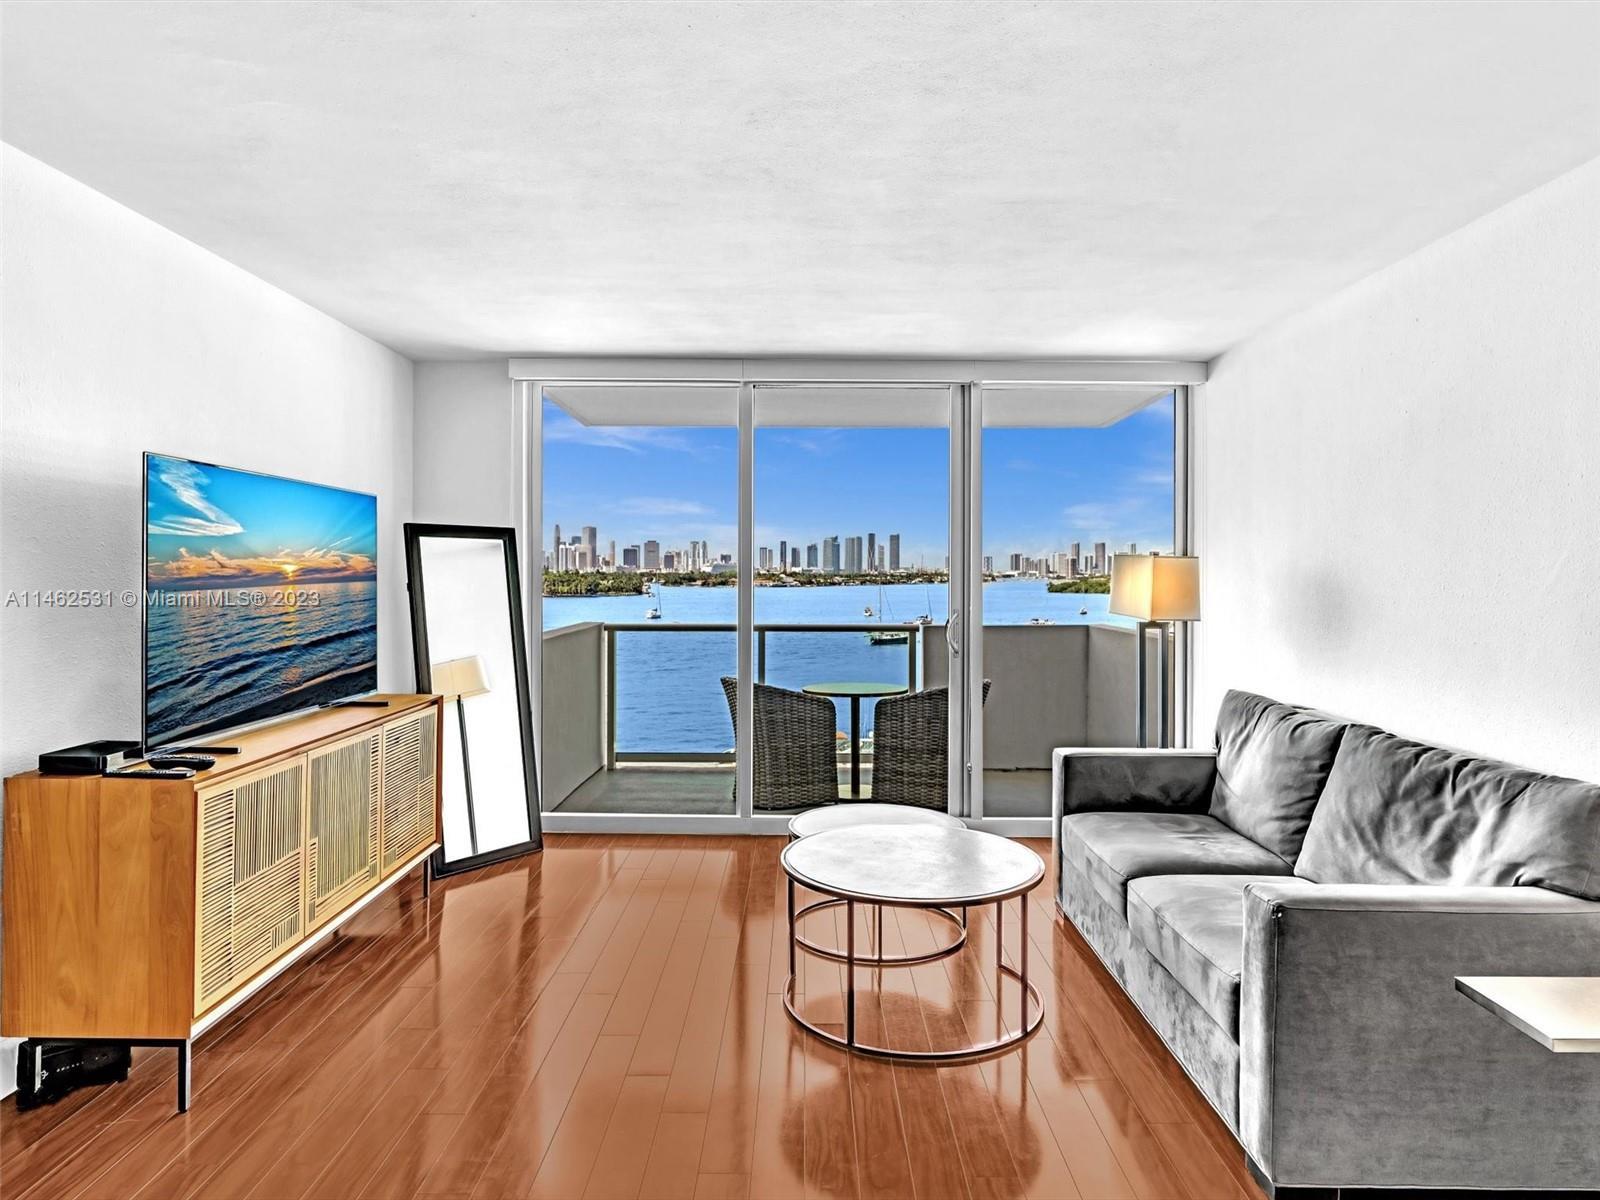 Introducing a Rare opportunity to own a stunning 1-bdrm condo w/ unobstructed & direct bay views at 